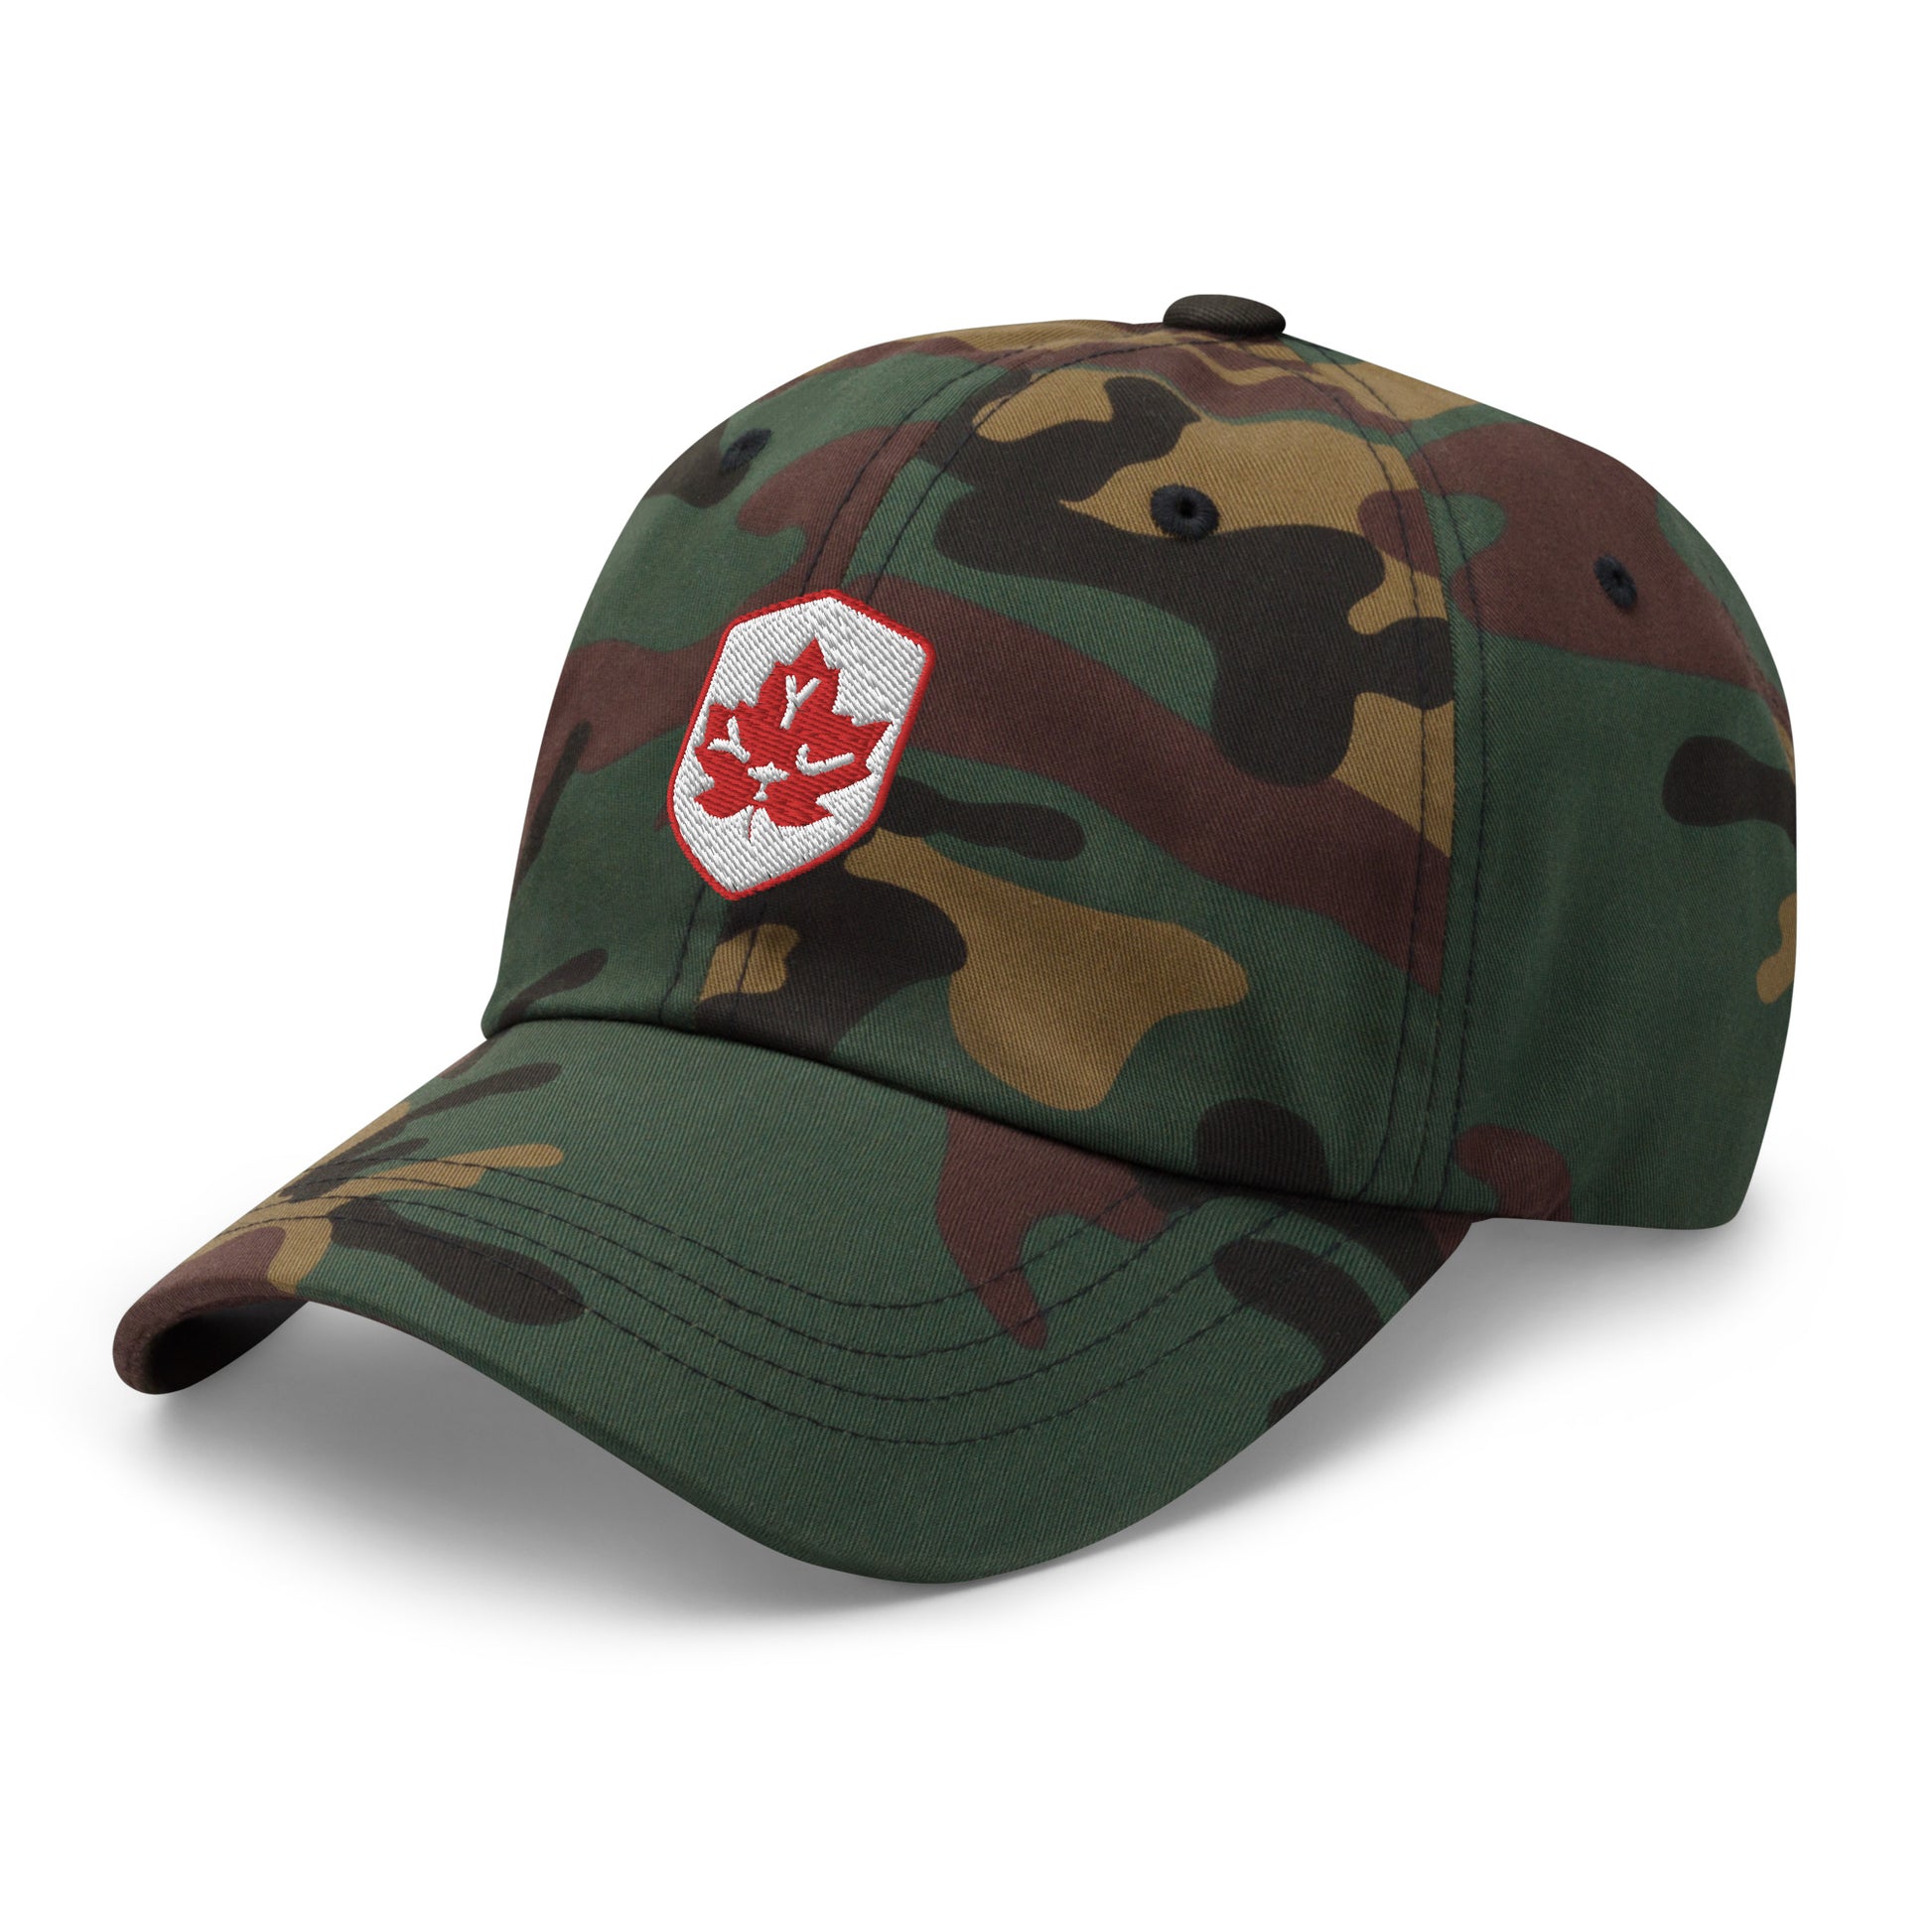 Maple Leaf Baseball Cap - Red/White • YYJ Victoria • YHM Designs - Image 20